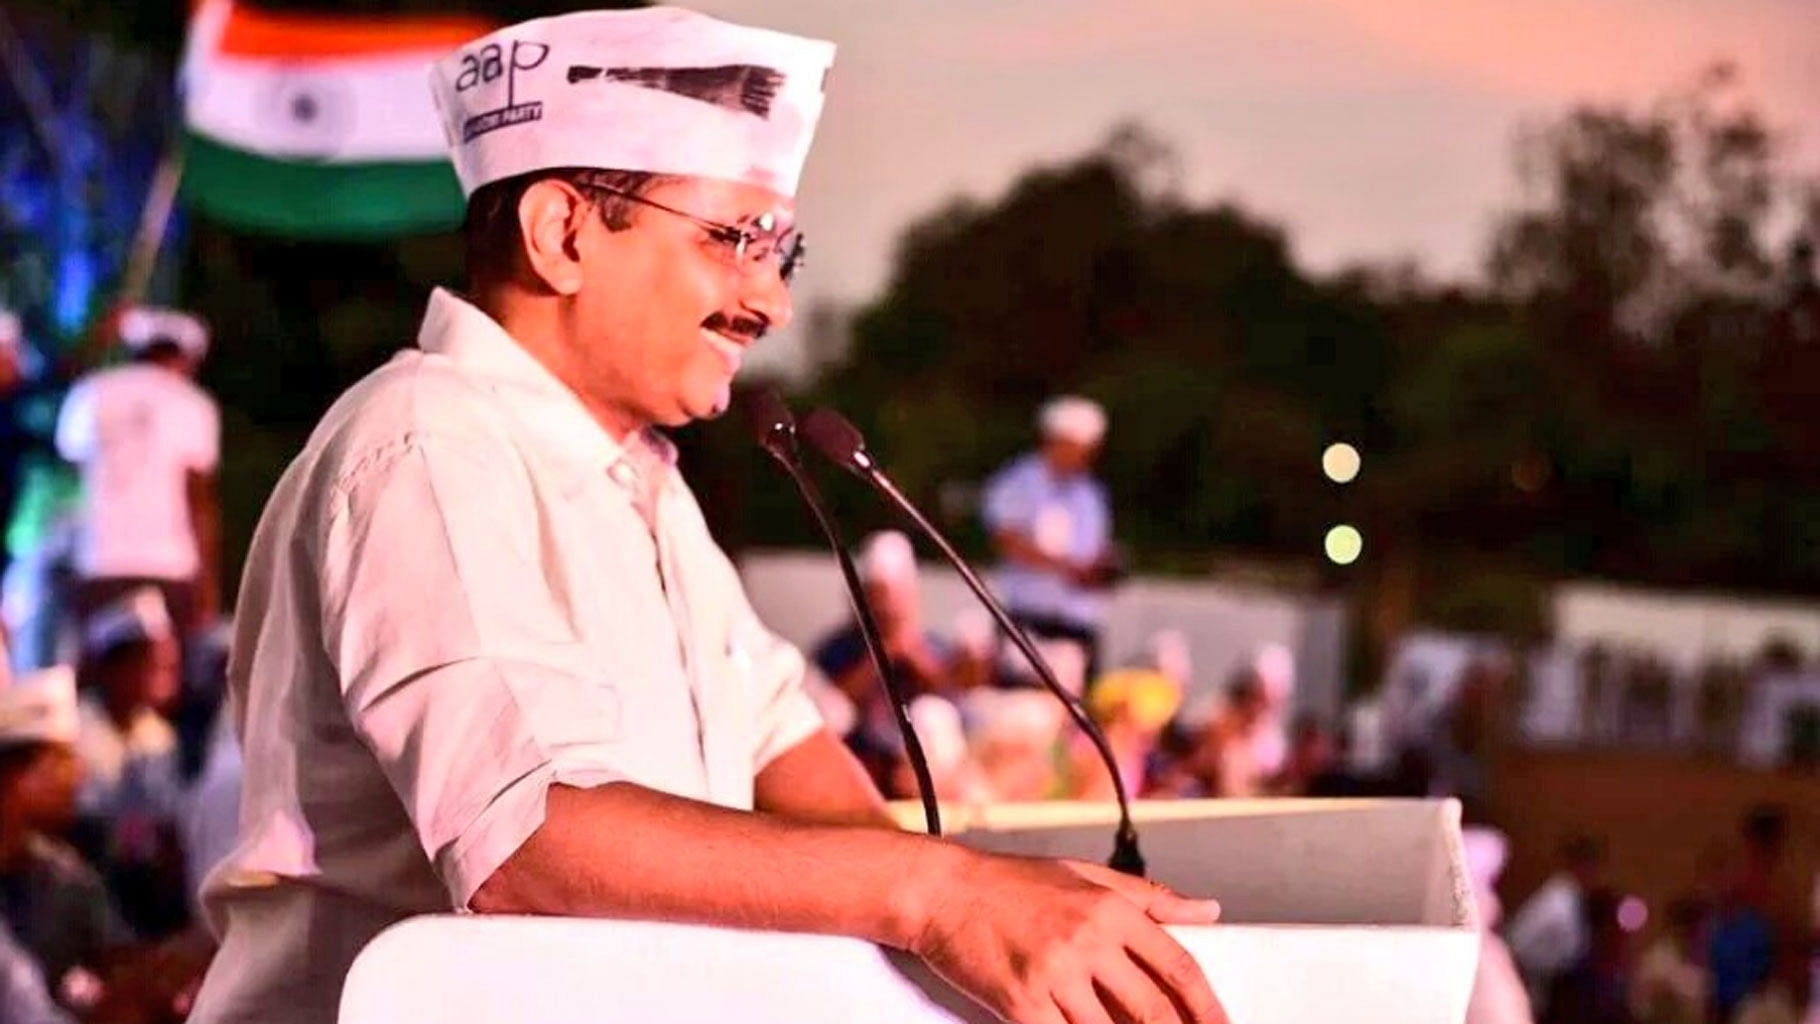 Arvind Kejriwal at a public rally in Panaji, Goa on Sunday. (Photo Courtesy: twitter/<a href="https://twitter.com/Akshay1Malhotra">@<b>Akshay1Malhotra</b></a>)